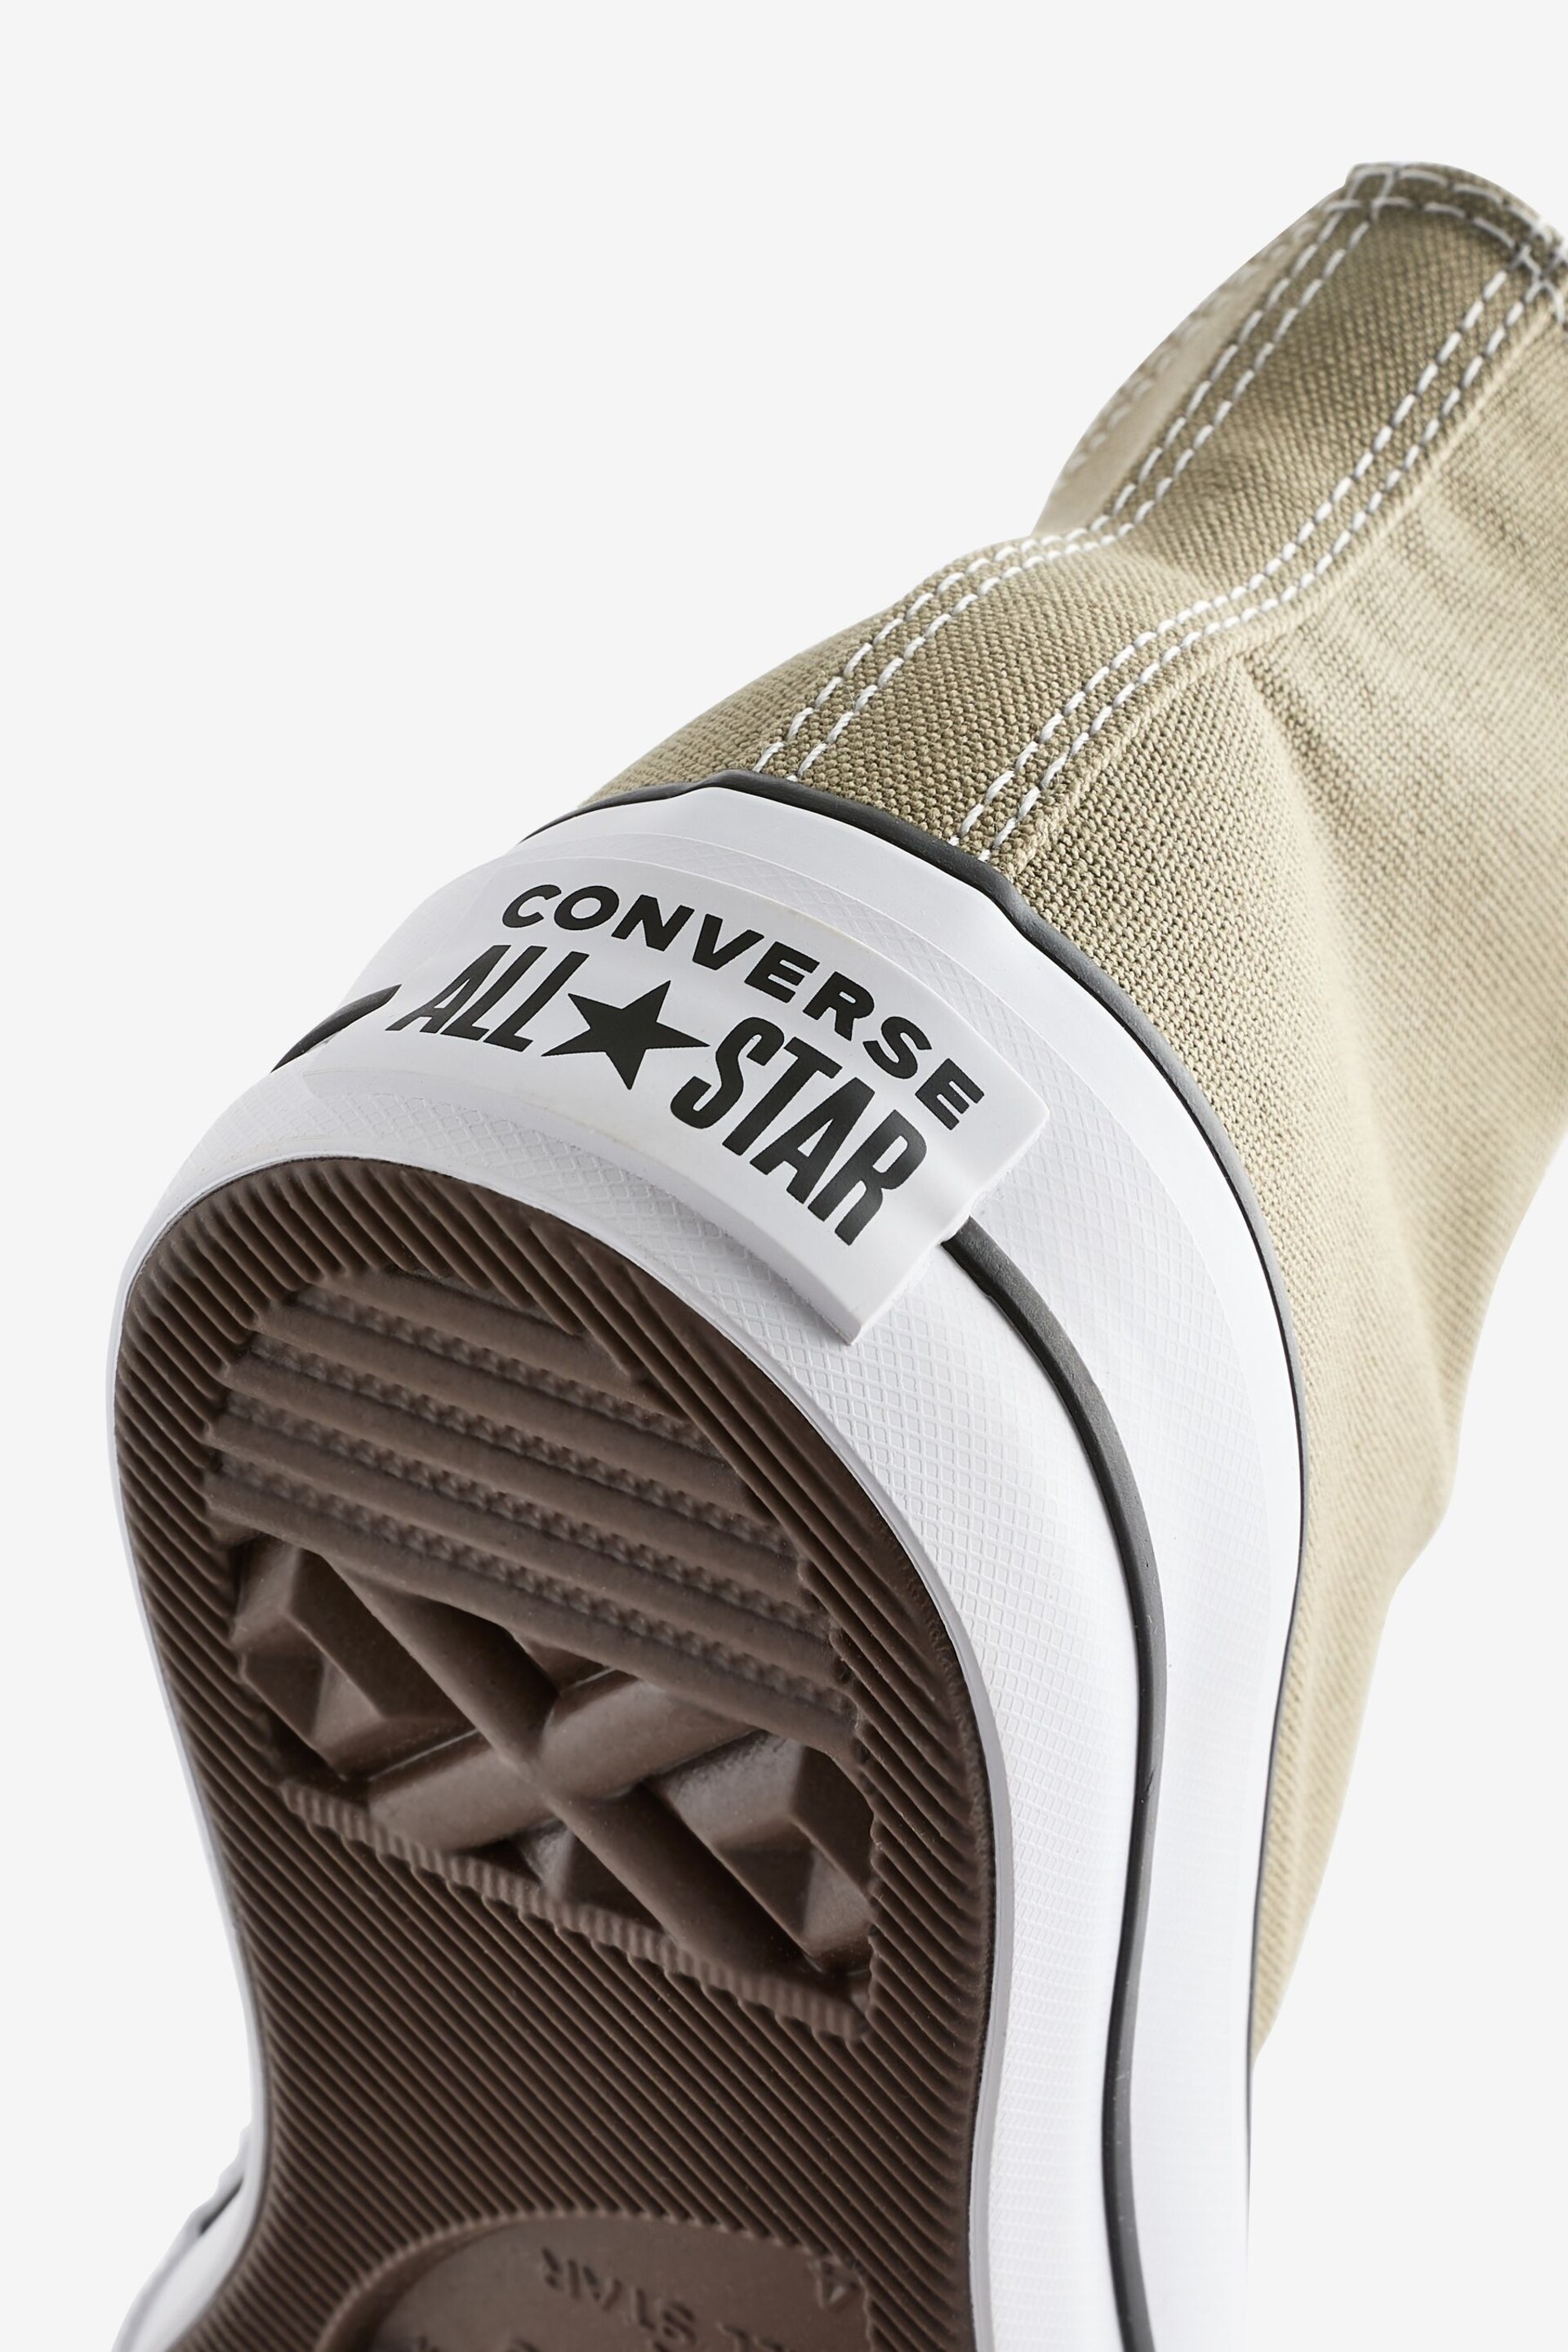 Converse Khaki Green Chuck Taylor All Star High Top Lift Trainers - Image 7 of 9